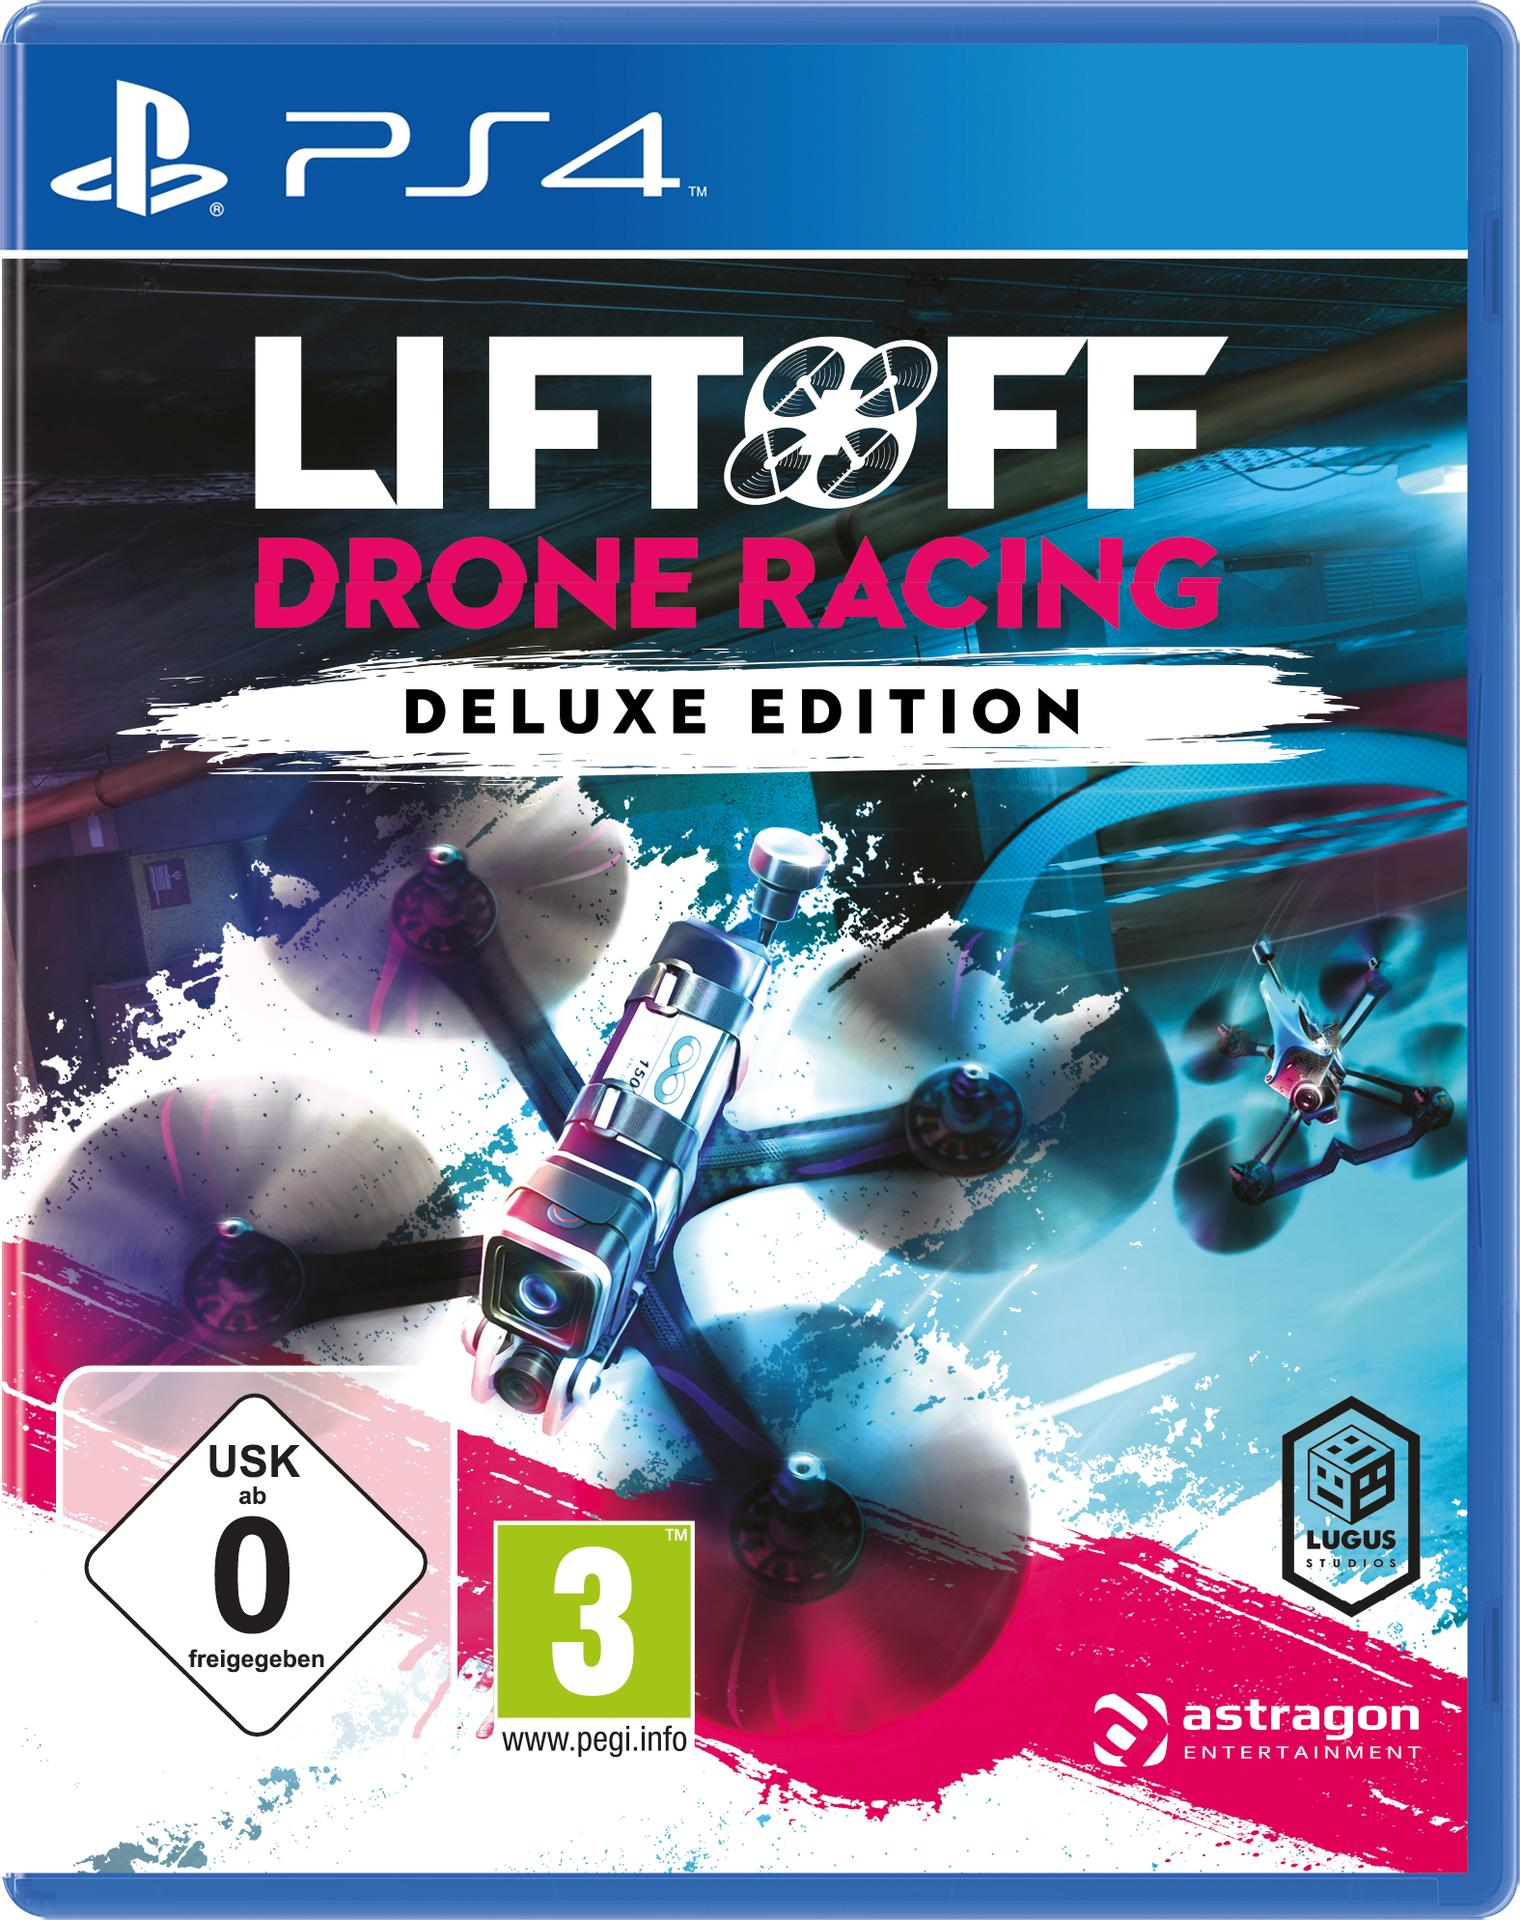 Edition Deluxe Racing 4] Drone [PlayStation Liftoff: -